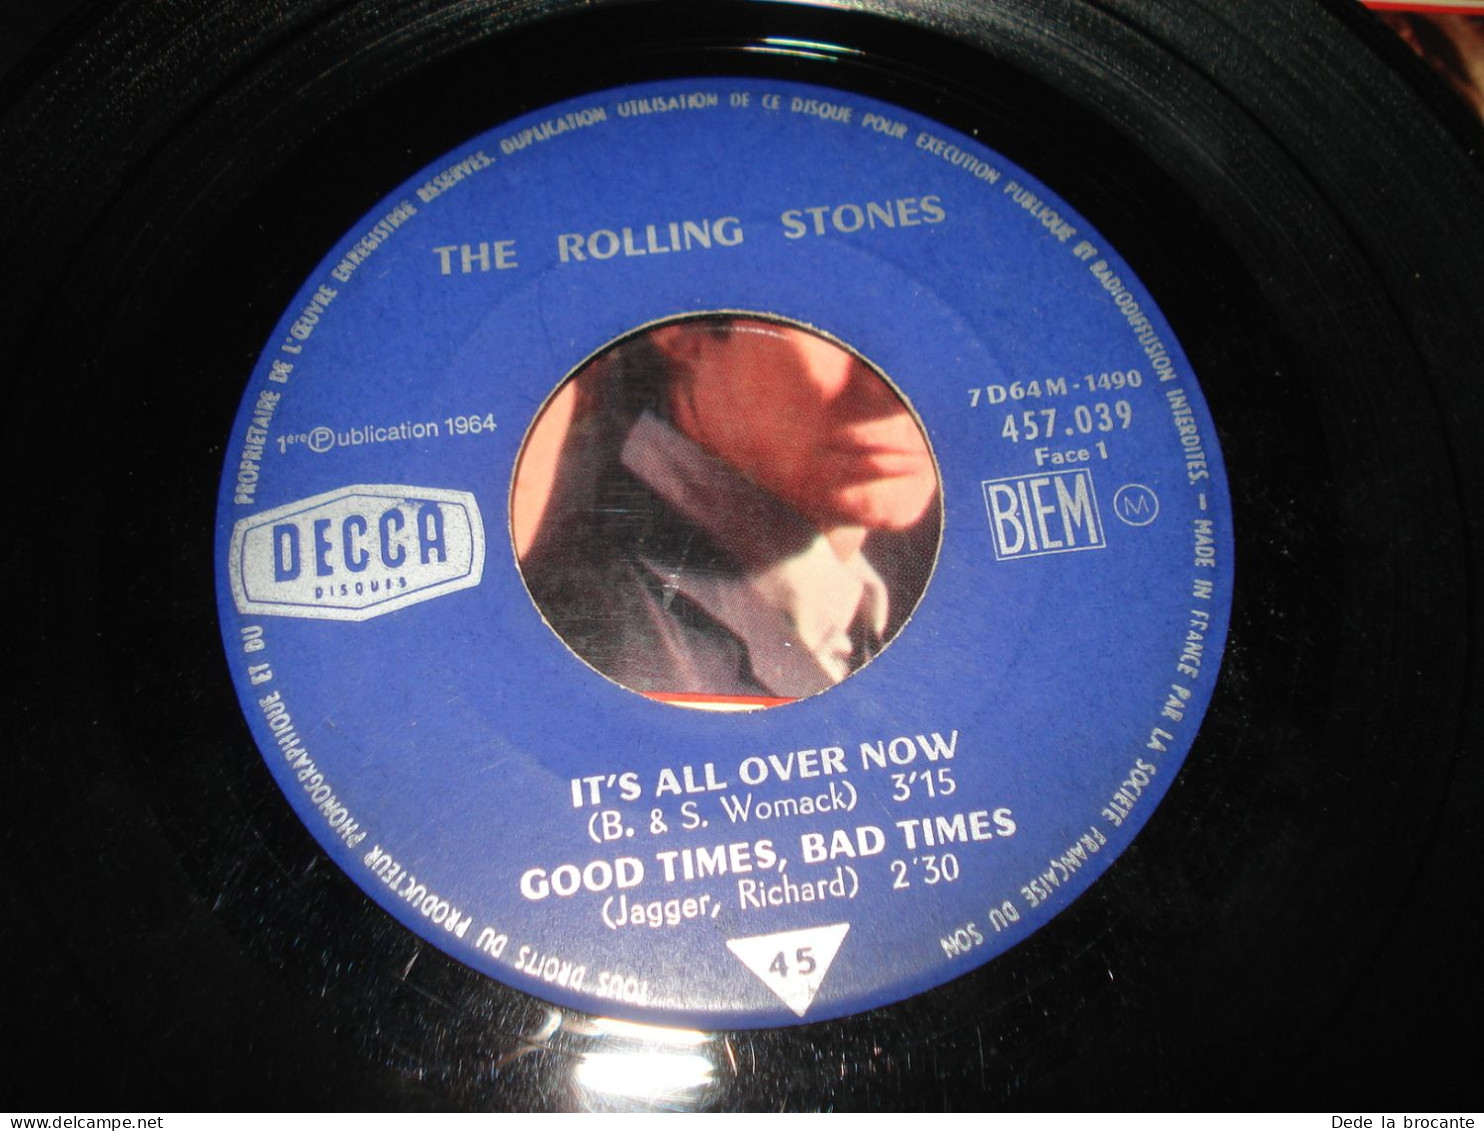 B14 / The Rolling Stones – It's All Over Now - Decca  457.039 - FR 1964  VG+/VG+ - Rock